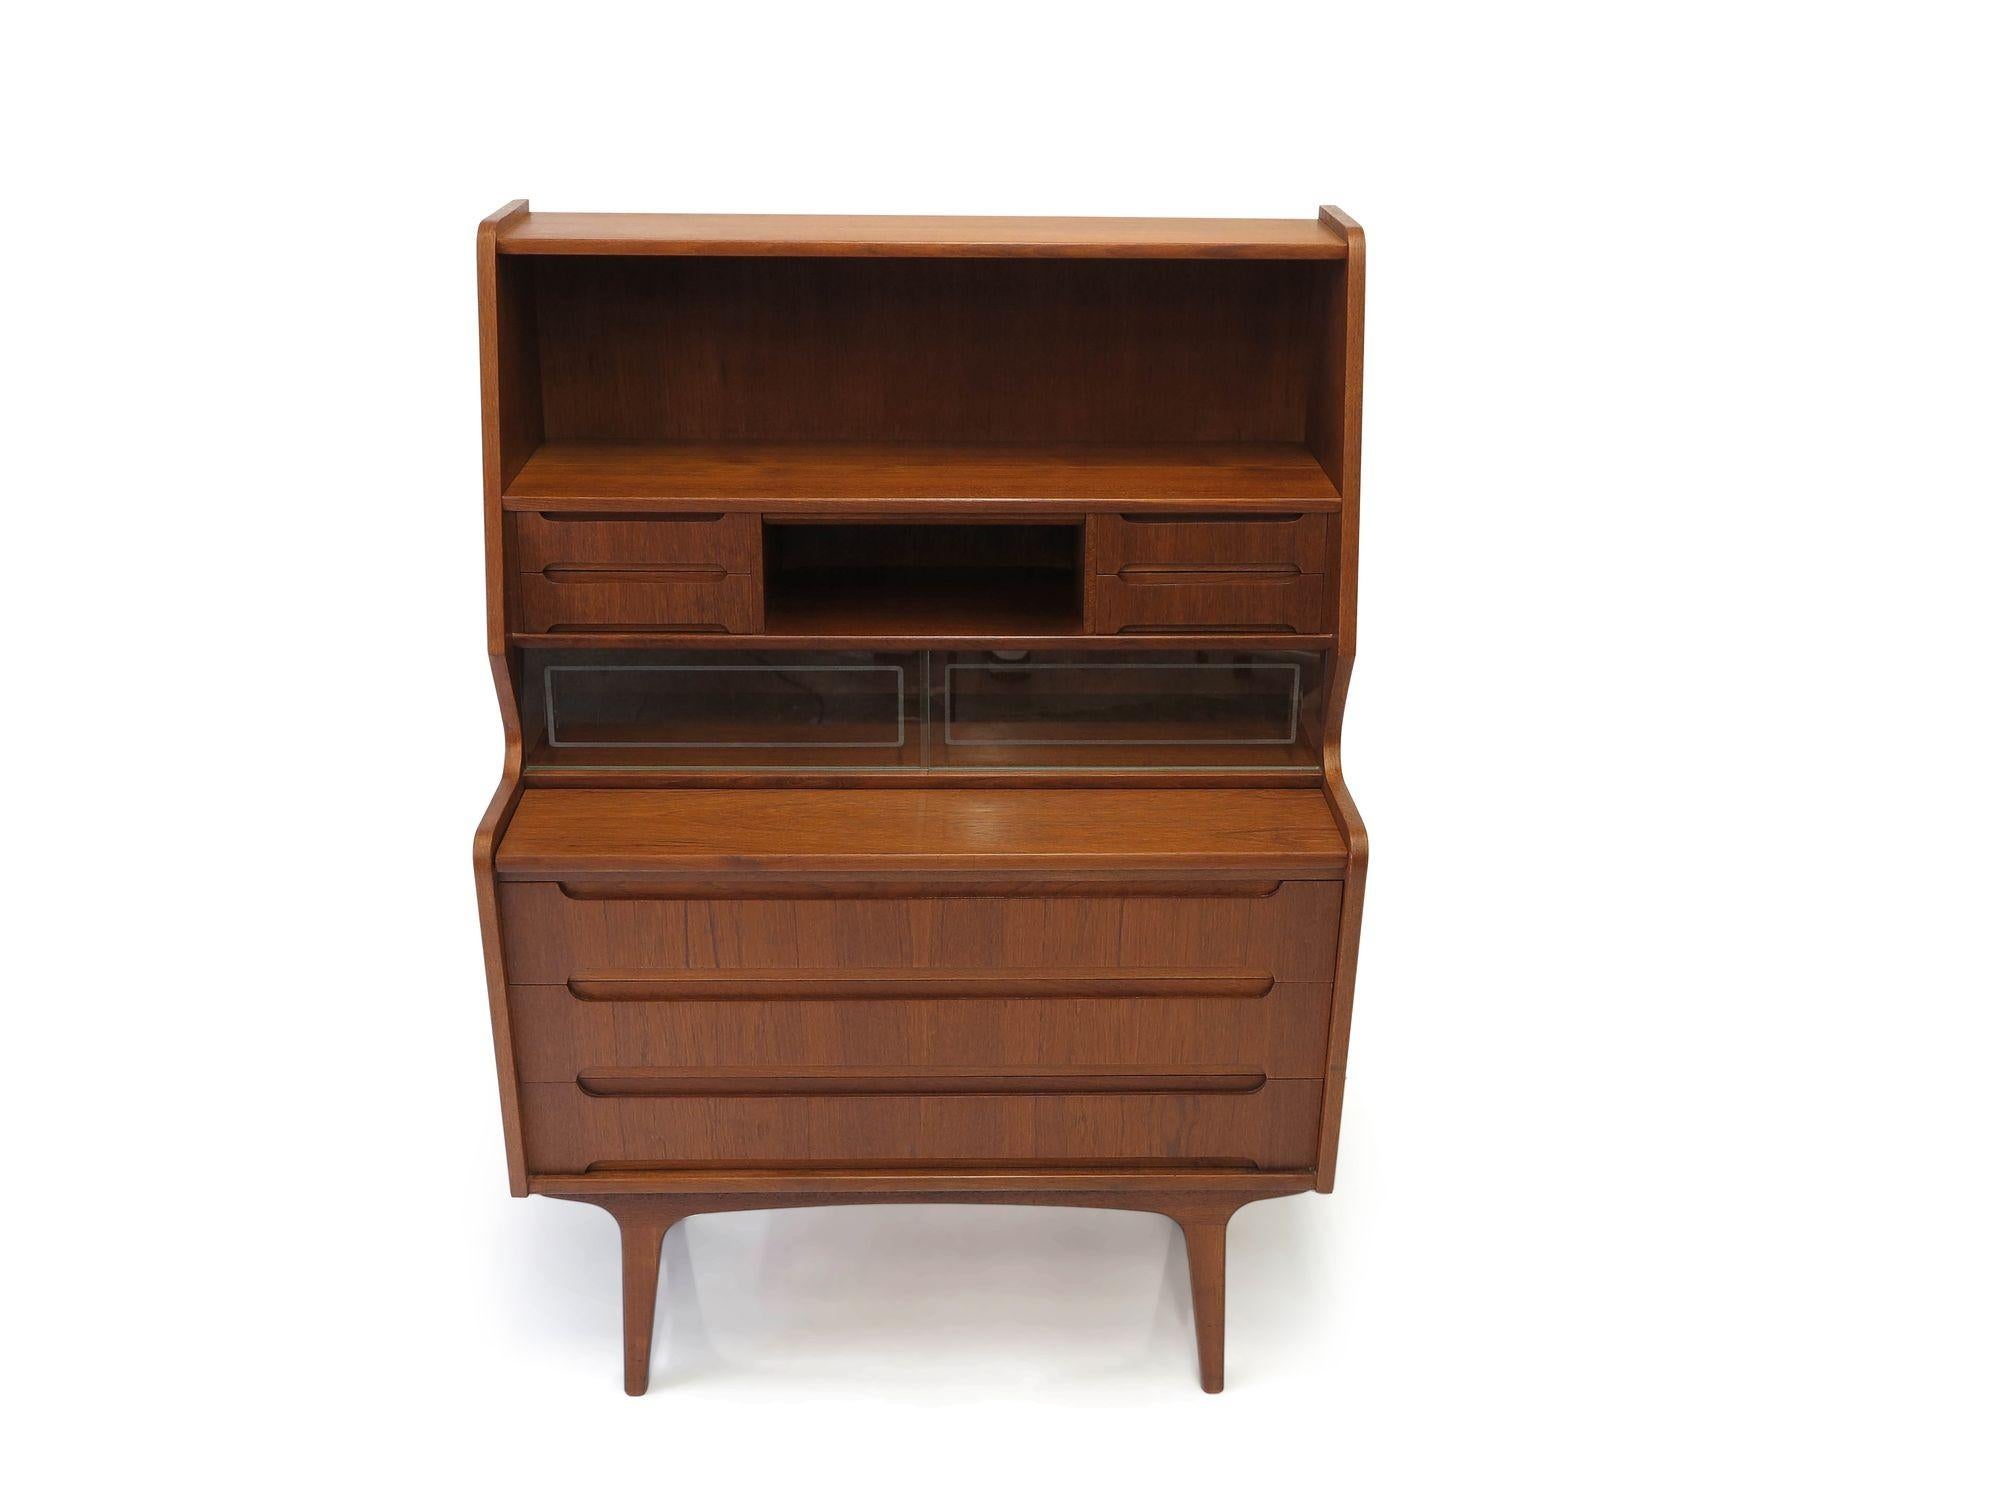 Danish teak secretary desk crafted of teak with book-matched grain across the drawers. The secretary features a pull-out writing surface over three drawers. A pair of sliding glass cabinet doors, a hidden vanity mirror, and four small drawers above.